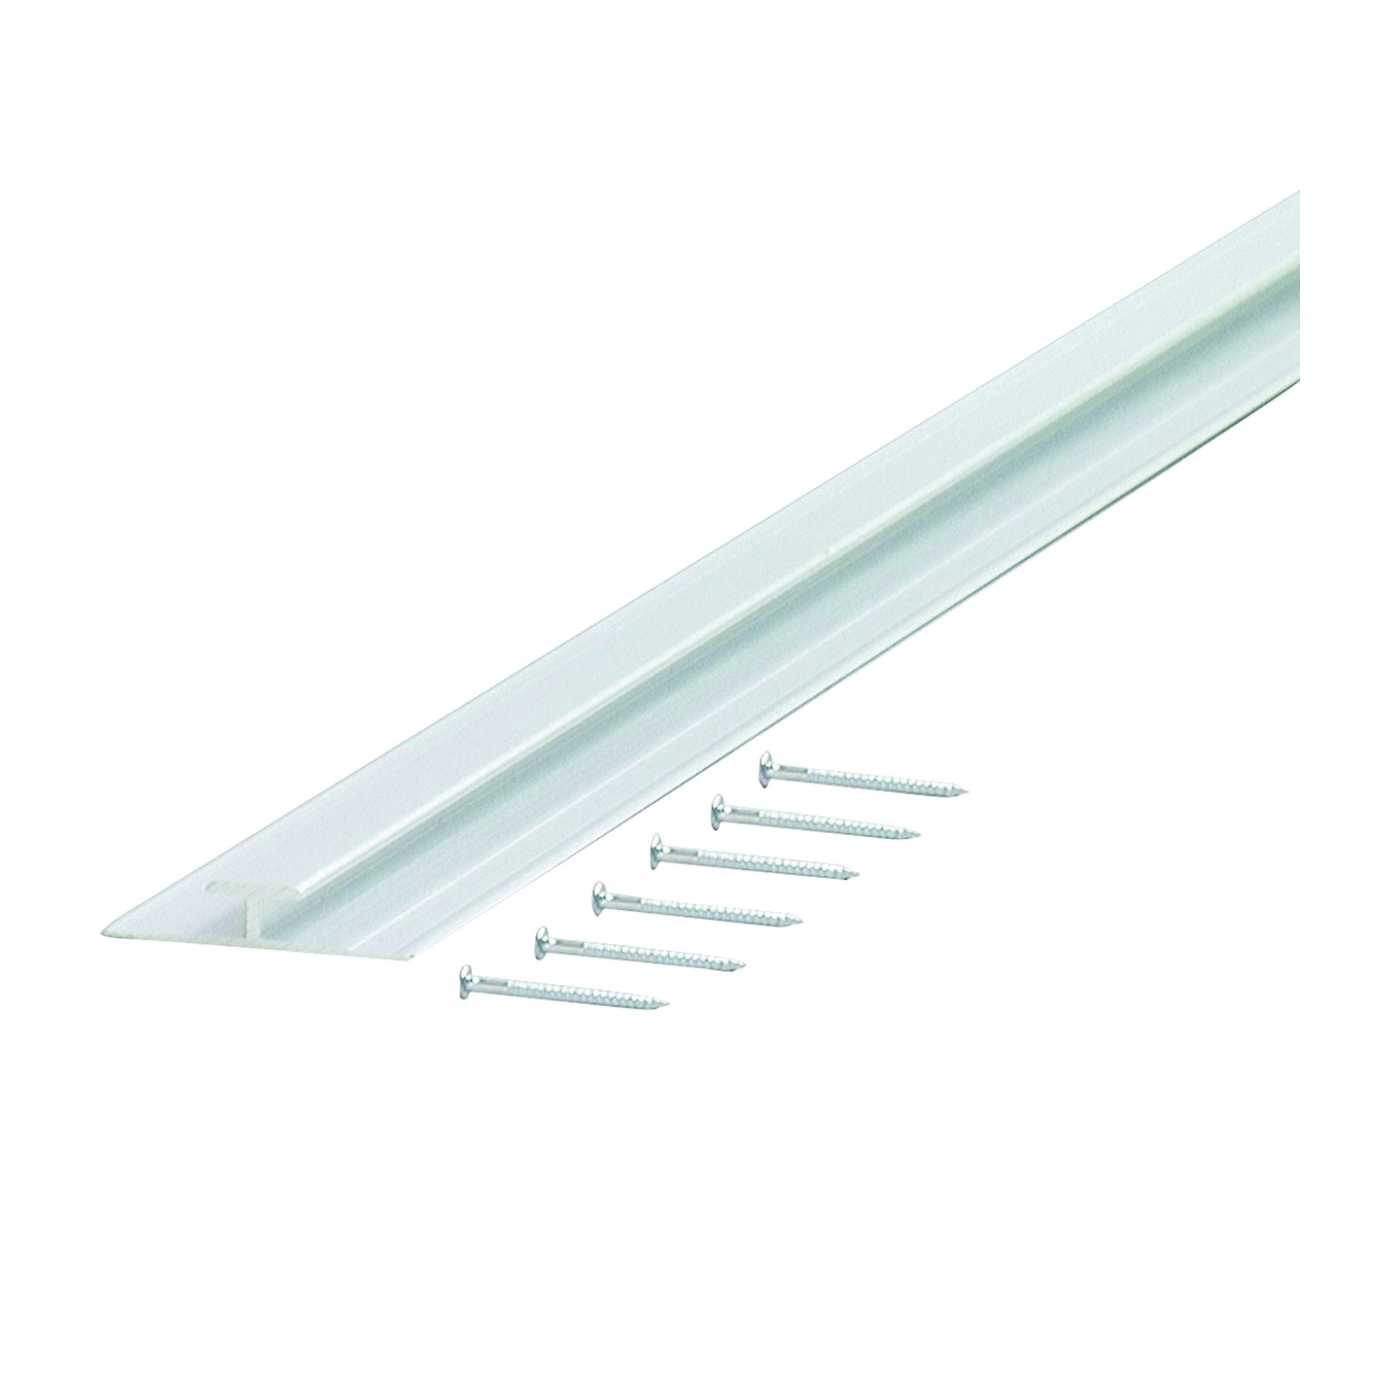 67165 Moulding Divider, 1-3/8 in W, Aluminum, Silver